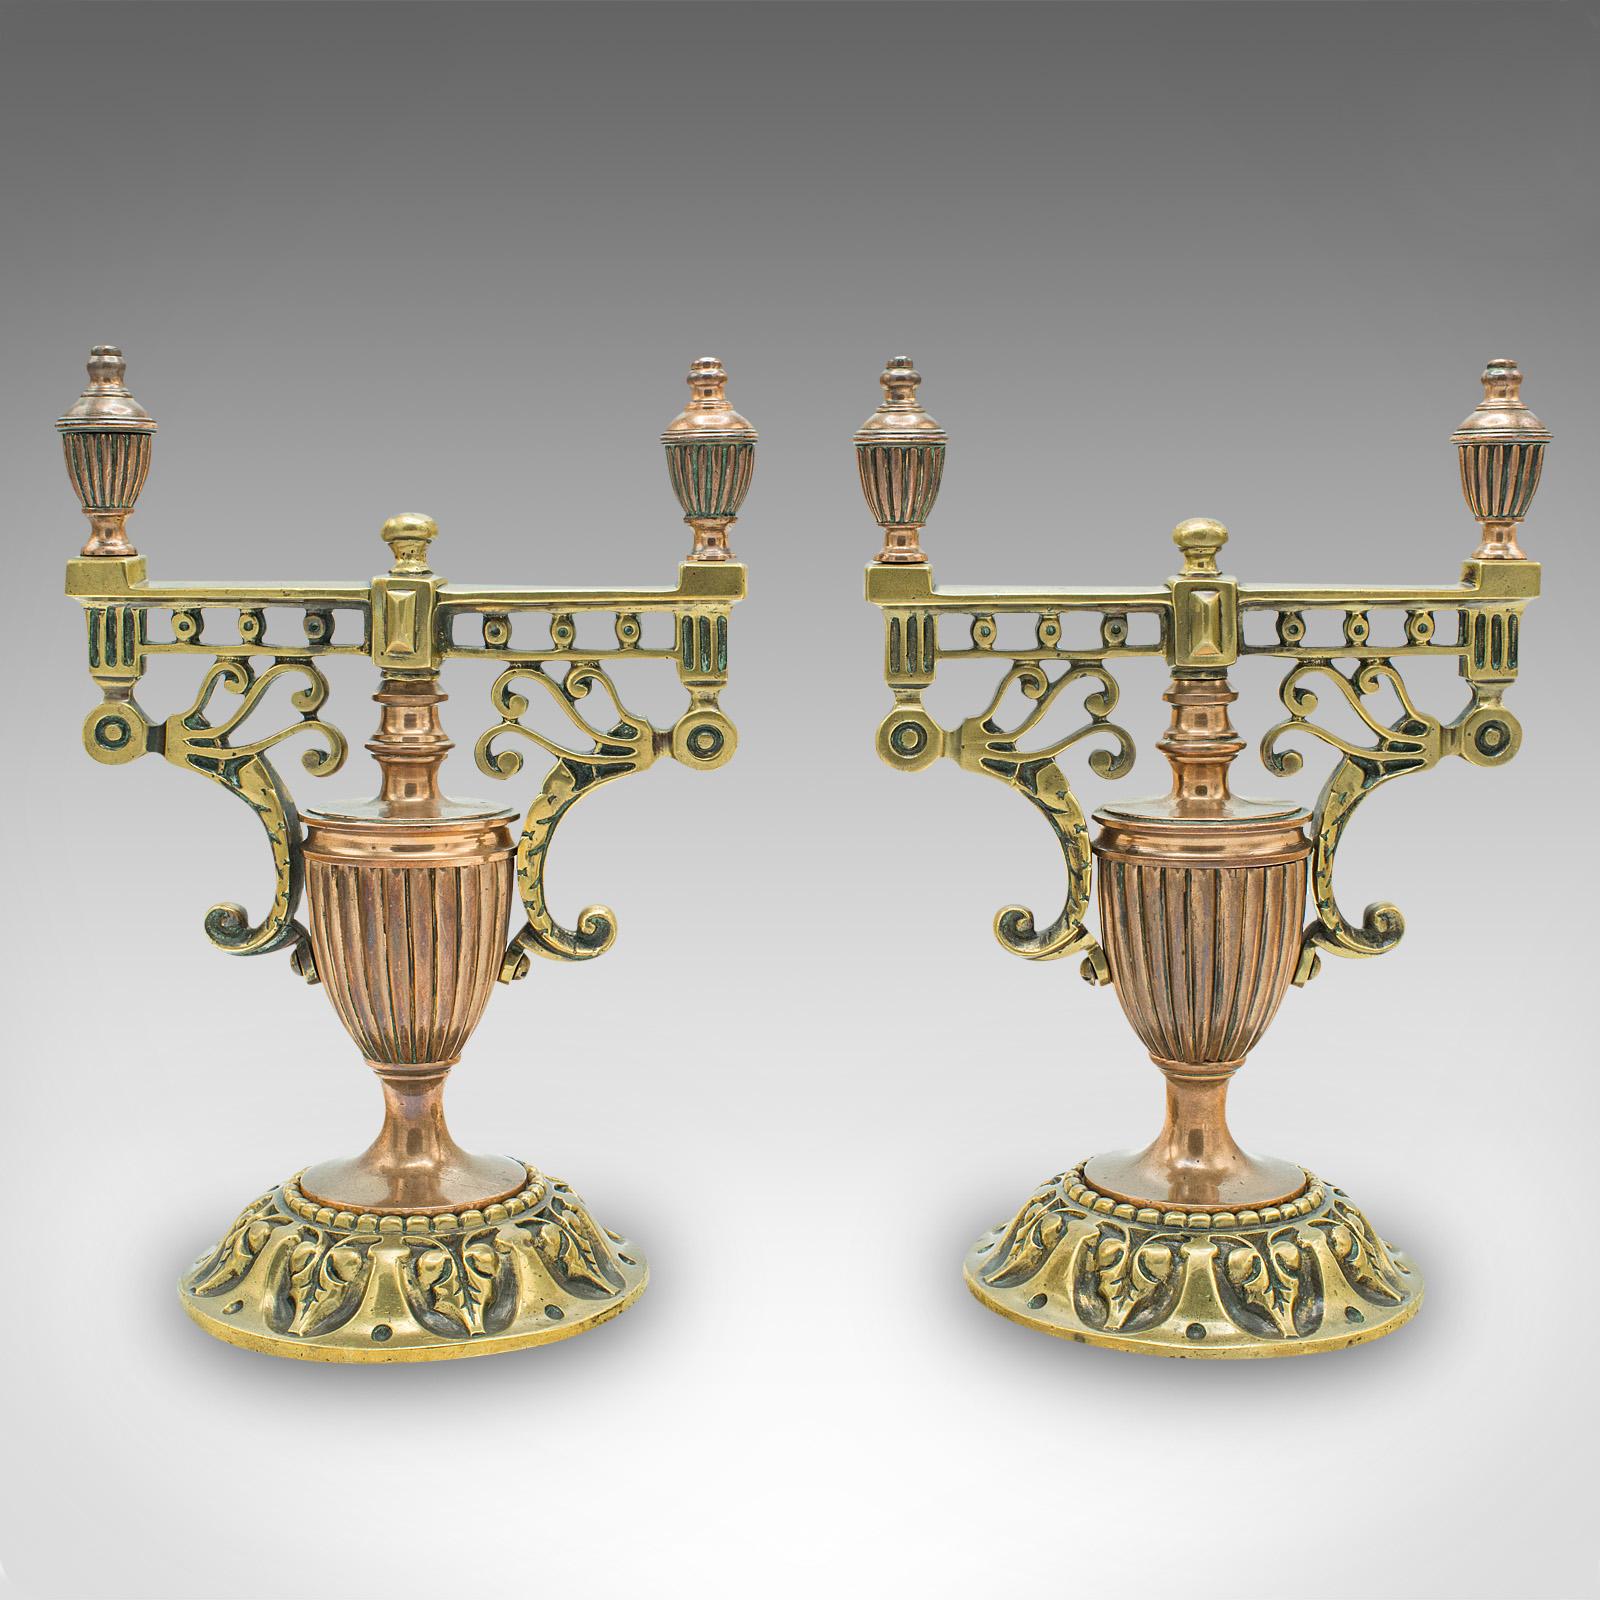 This is a pair of antique decorative tool rests. A Continental, brass and copper fireside stand in the Grand Tour taste, dating to the early Victorian period, circa 1860.

Beautifully ornate and of superb quality, perfect for the grand fireplace